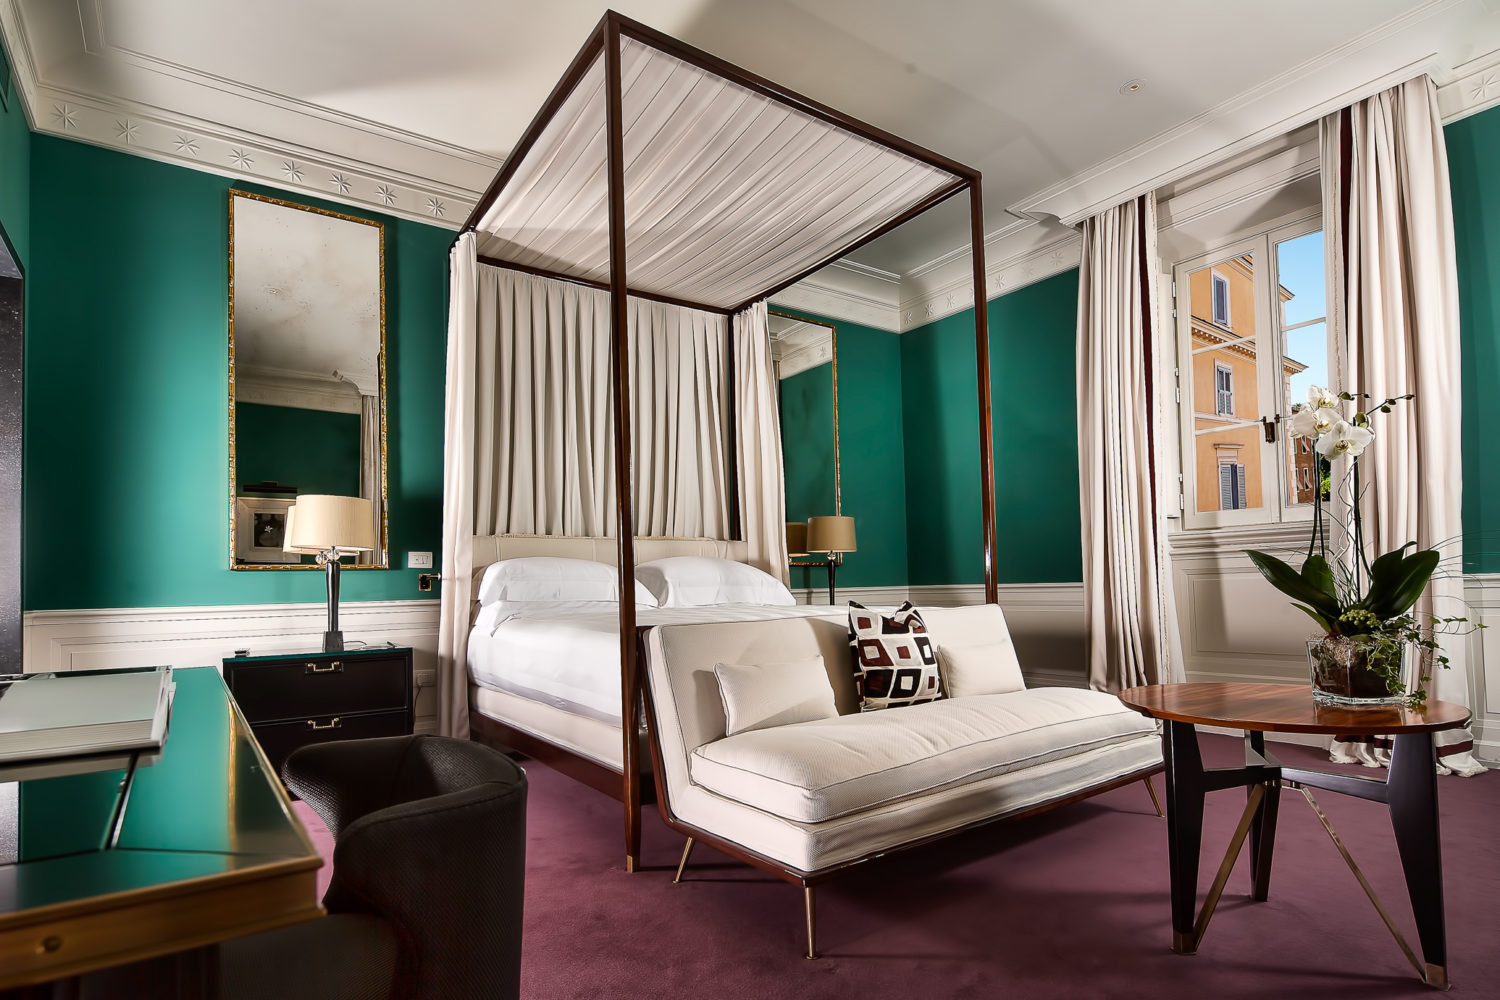 At the JK Place Rome all rooms are different and they all offer a sophisticated design with handmade furniture and full Italian marble bathrooms.